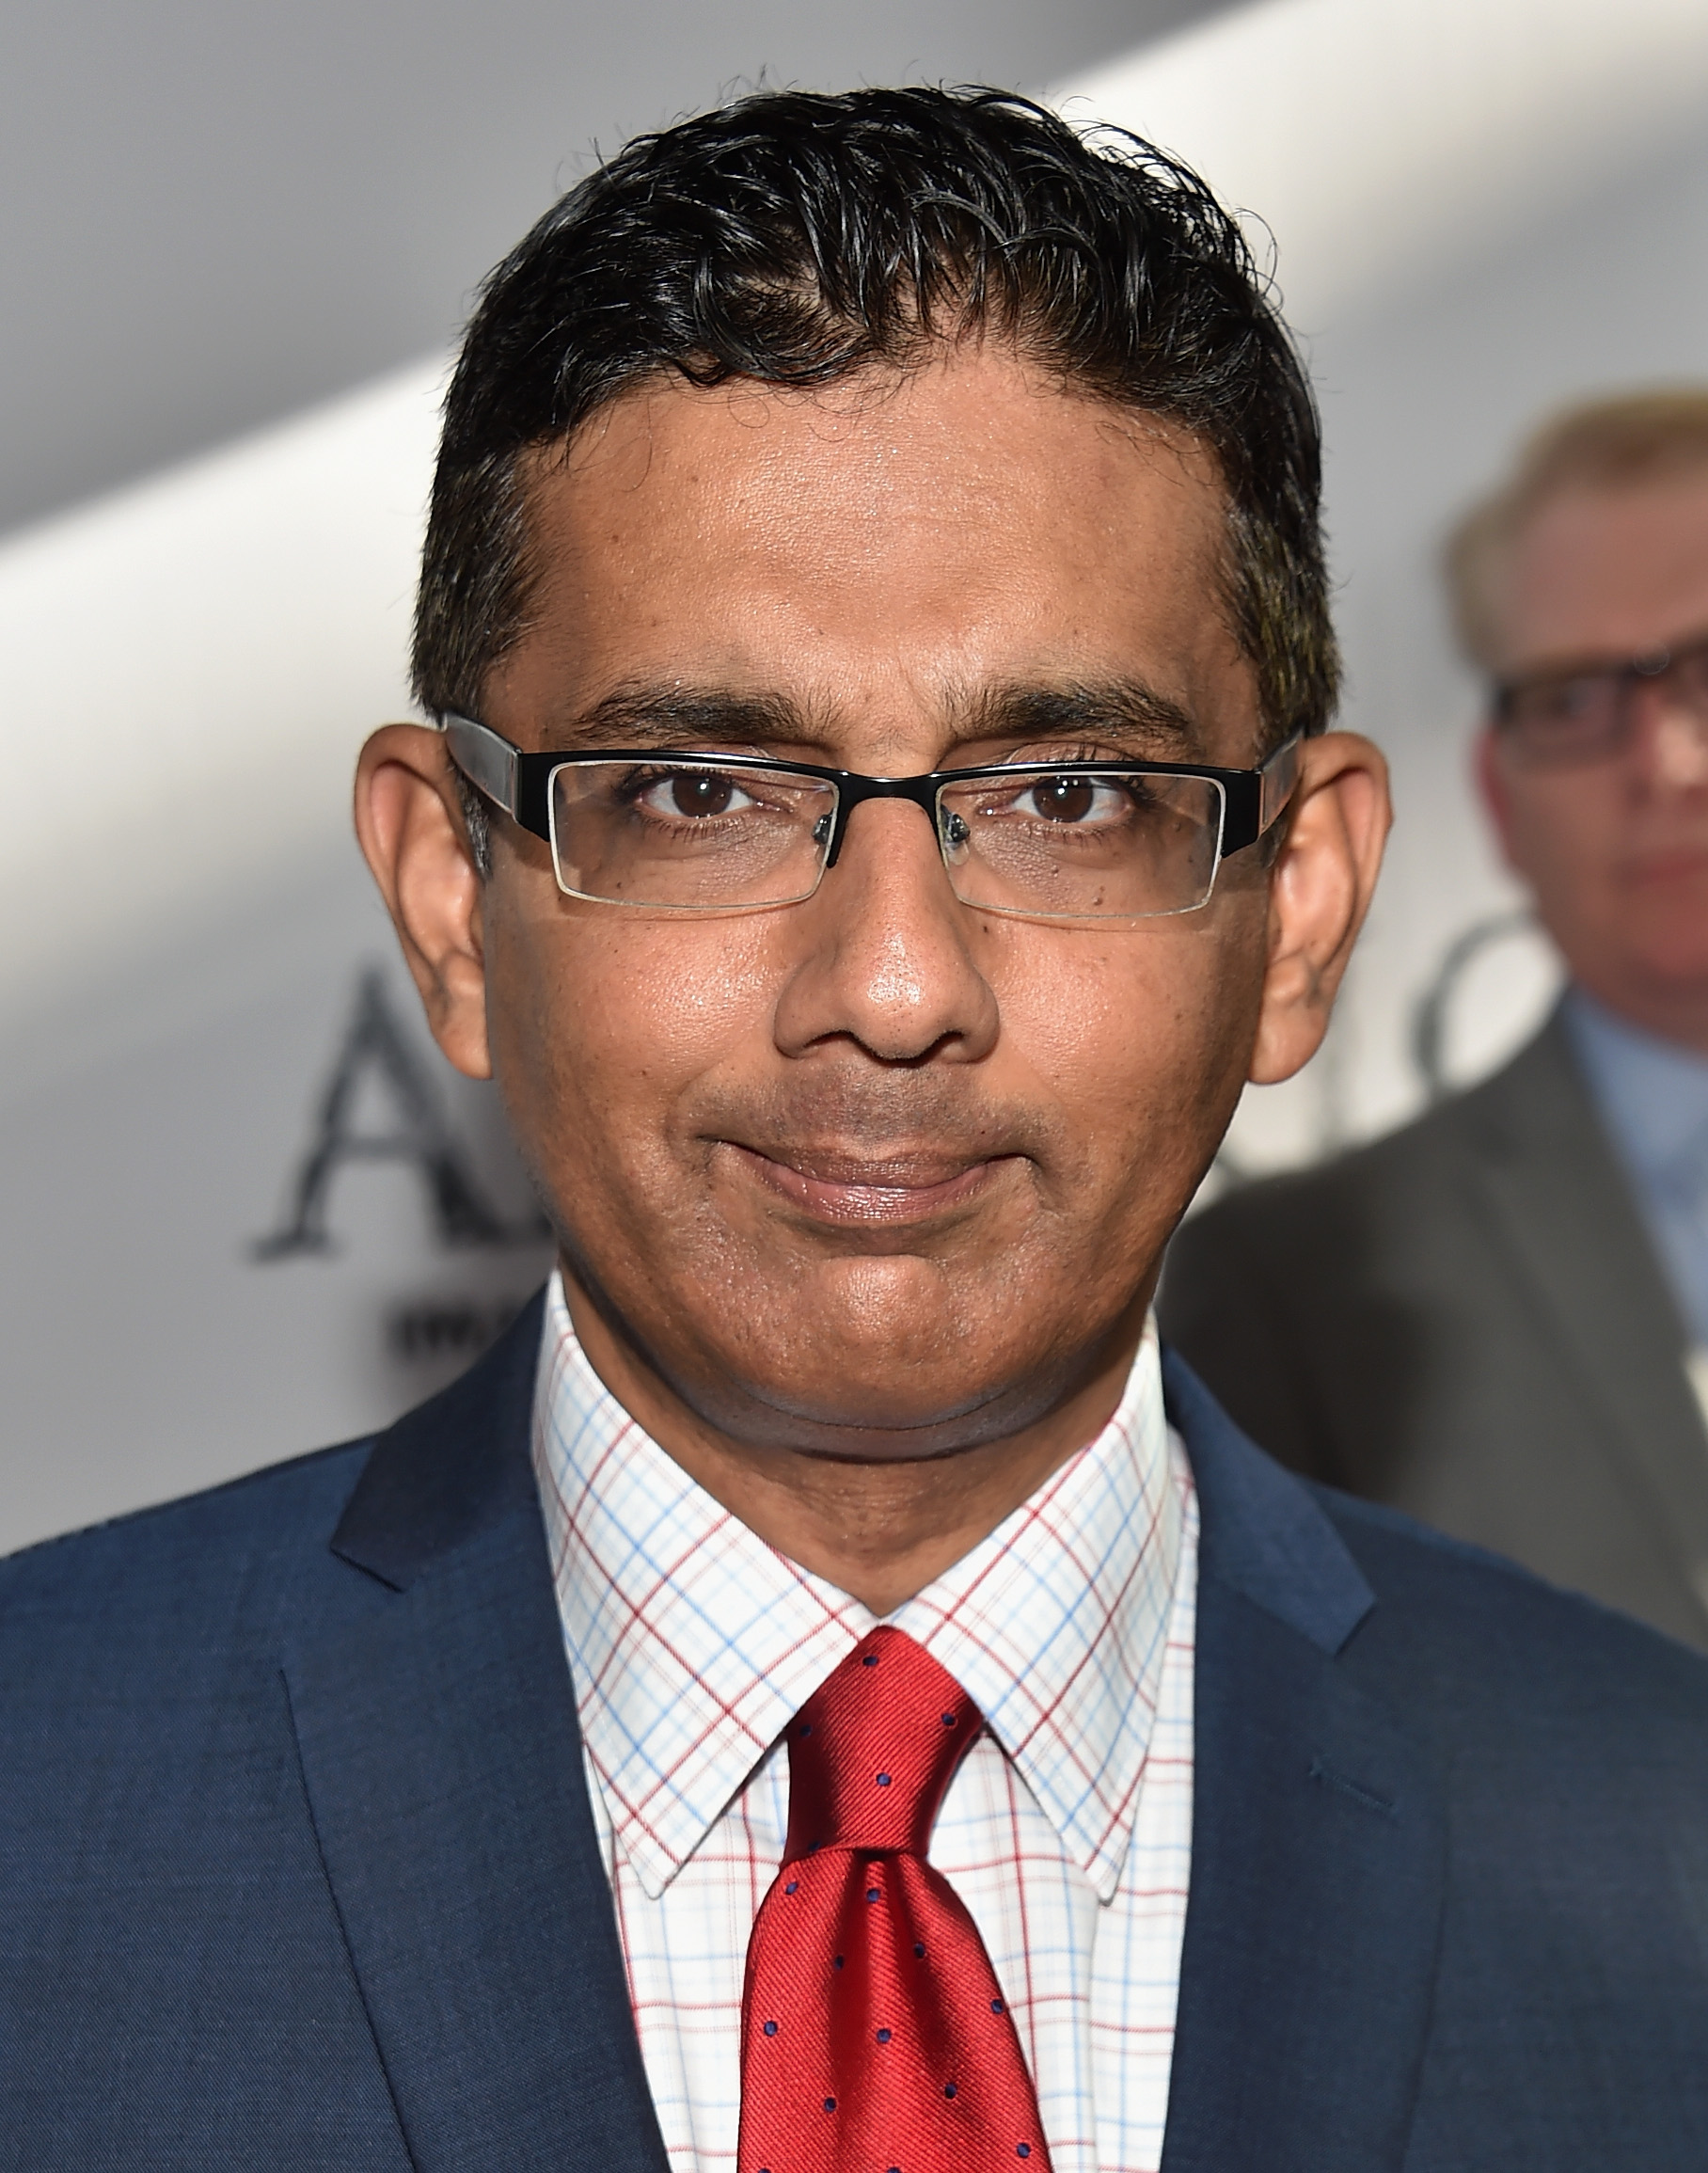 Dinesh D'Souza at the premiere of "America" on June 30, 2014, in Los Angeles, California. | Source: Getty Images